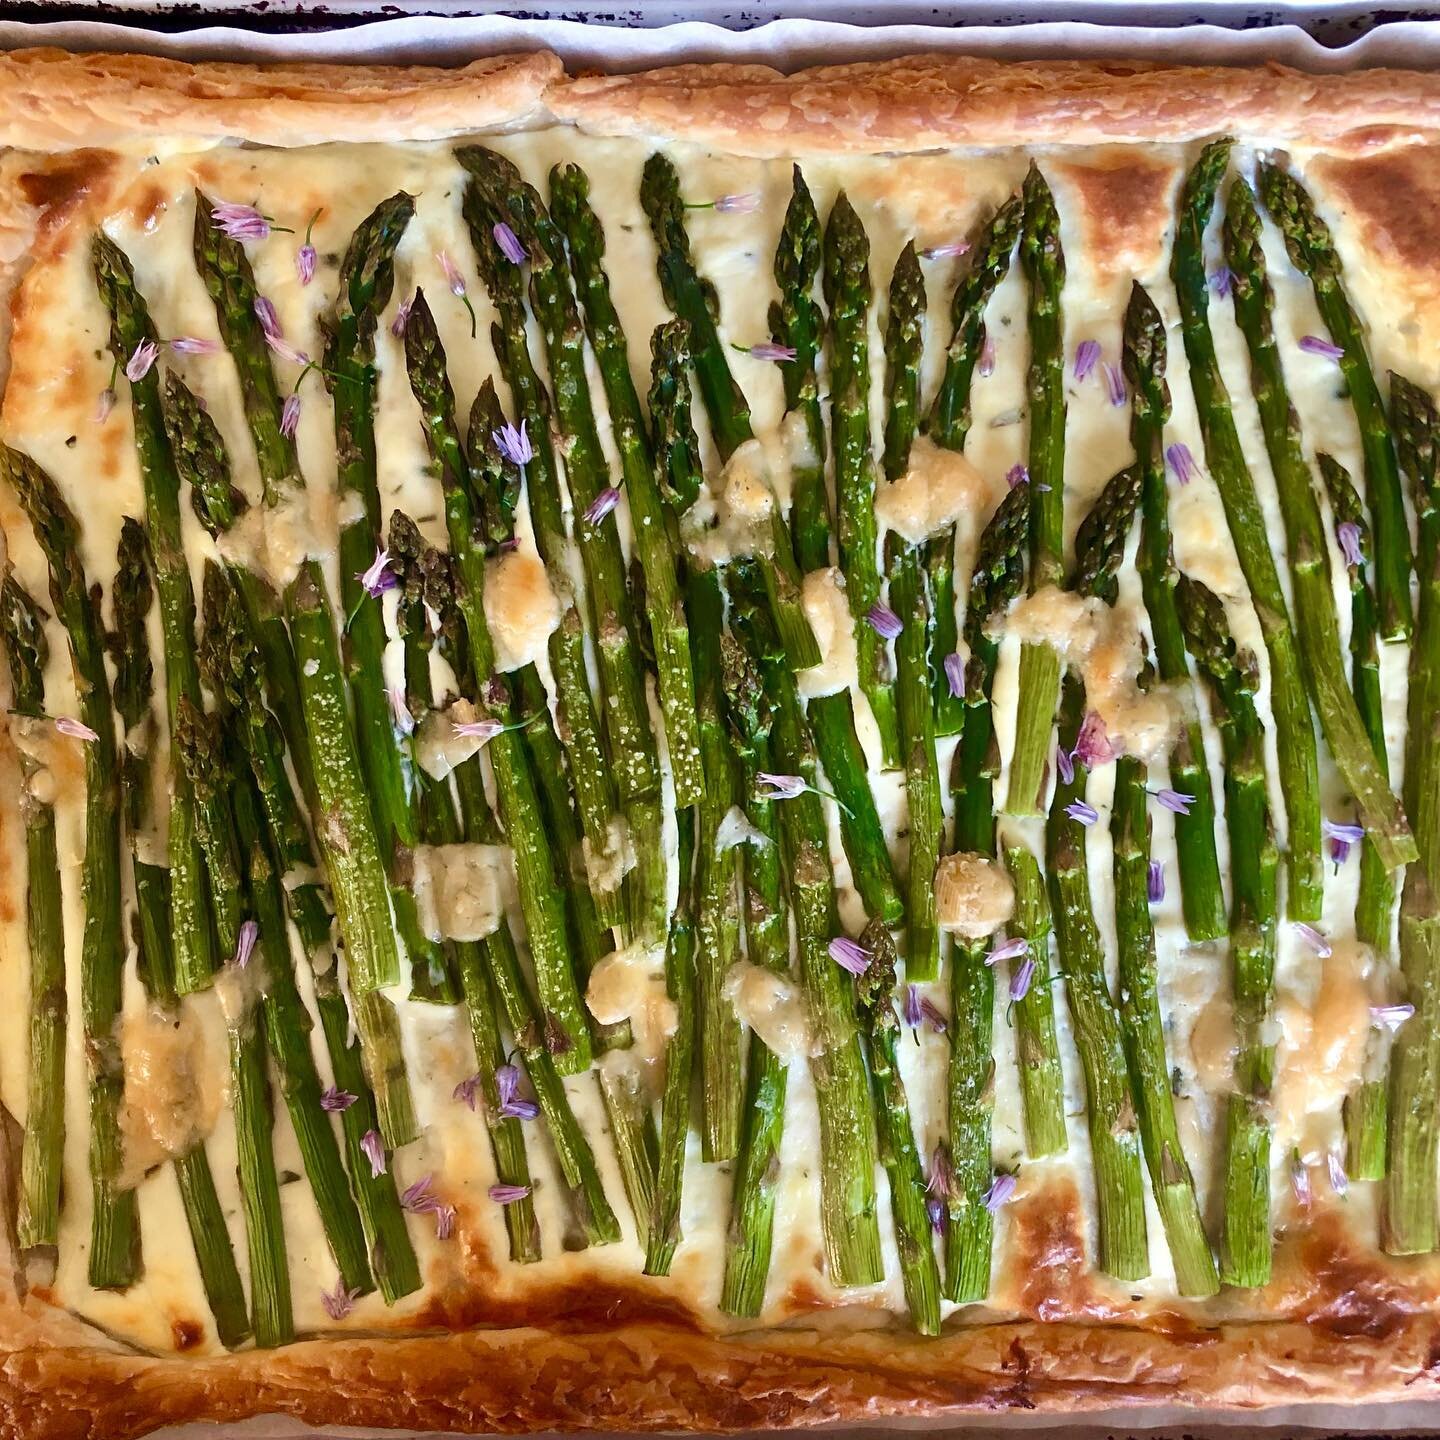 Step 1: Buy loads of asparagus at the market. Step 2: Make the asparagus tart from @clarkbar fab Dinner in French last night. One of my favorite spring dinners! (Recipe in the book and @nytcooking)